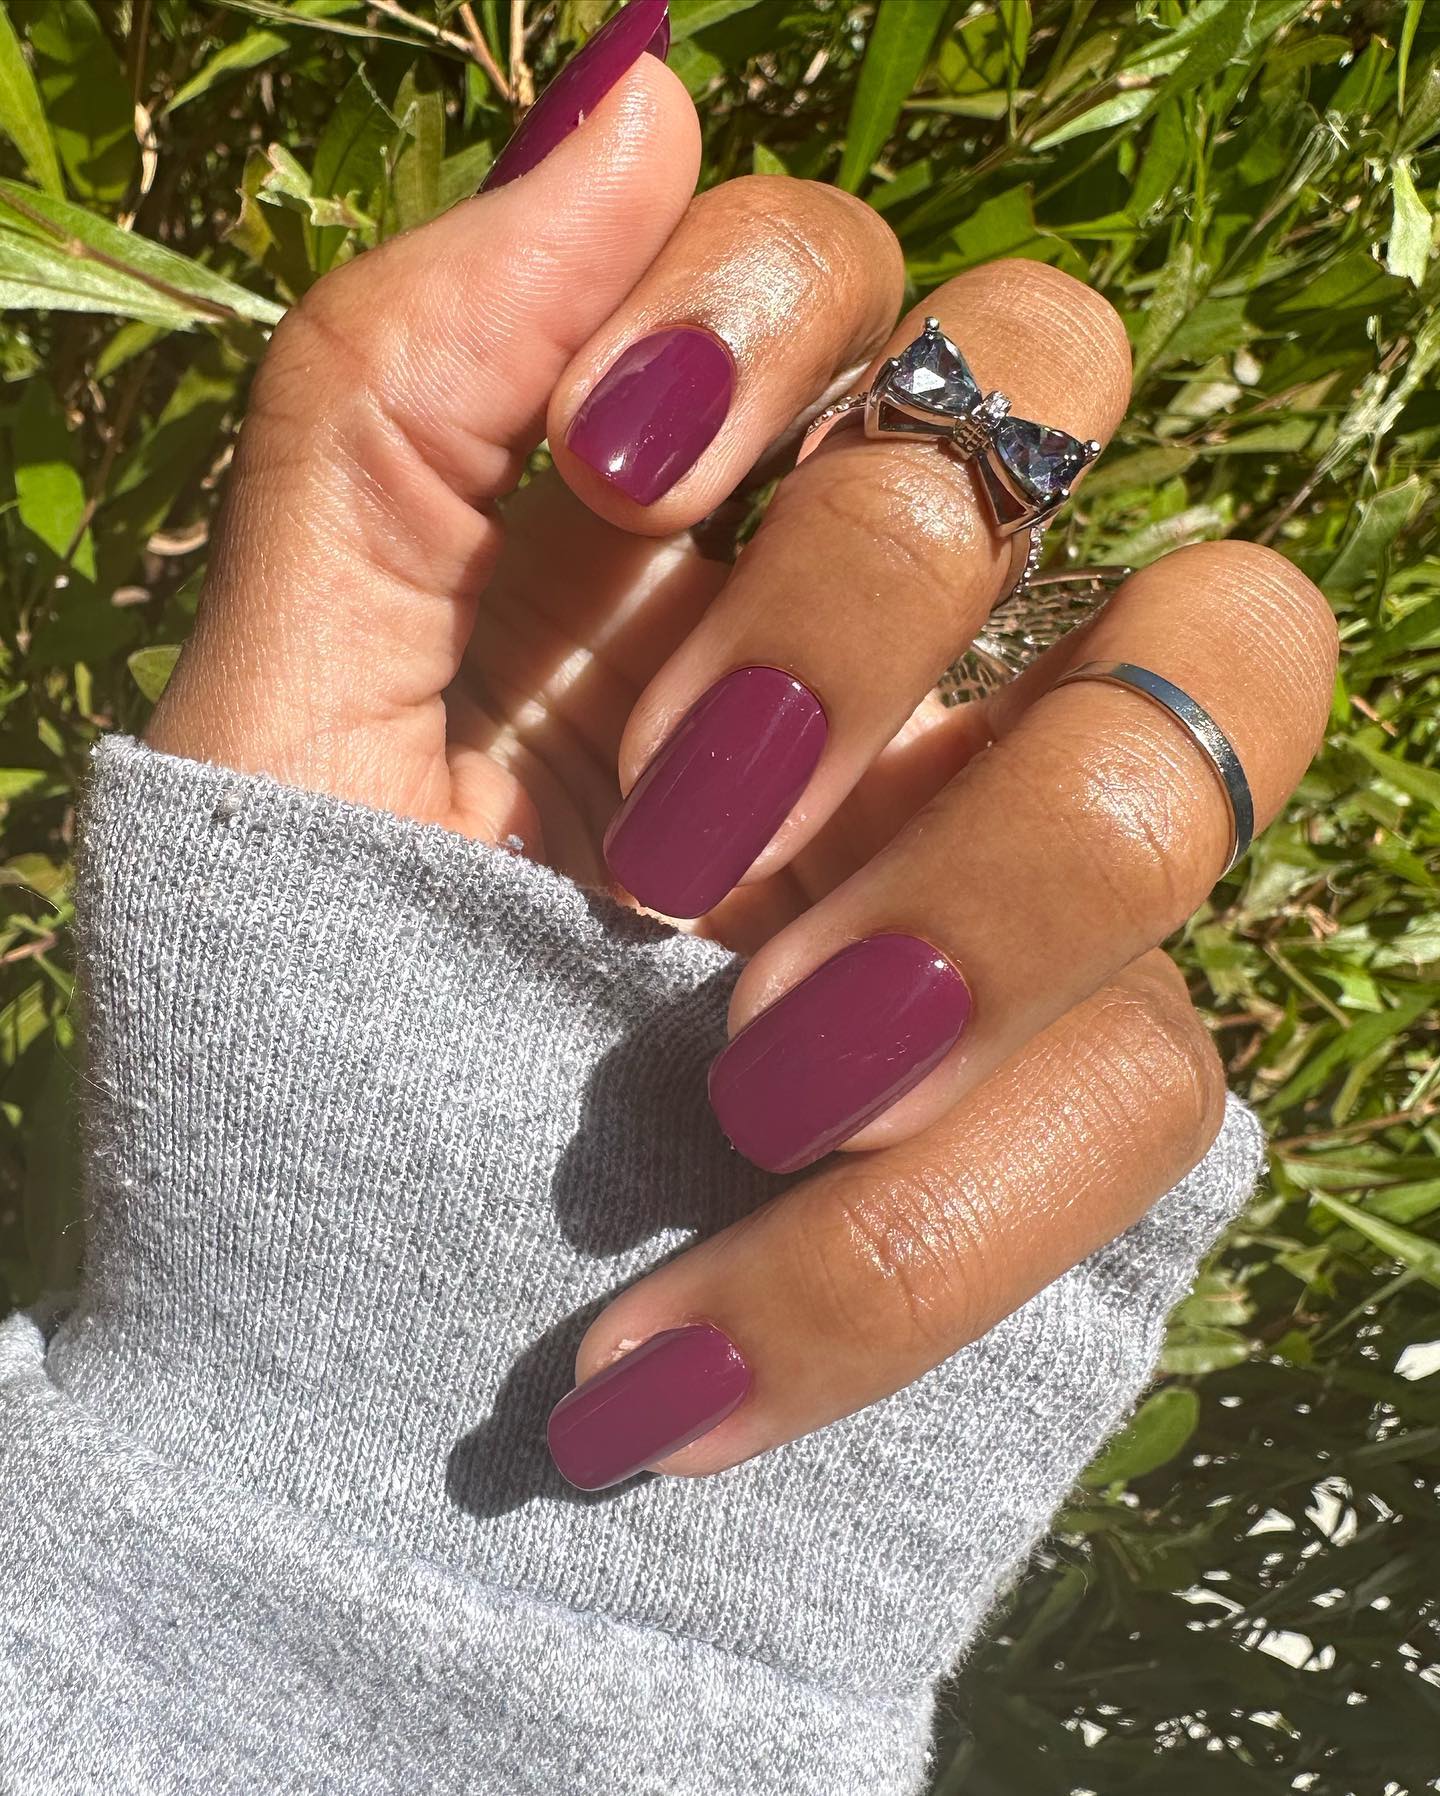 A close up of a hand with plum nail polish on the nails.